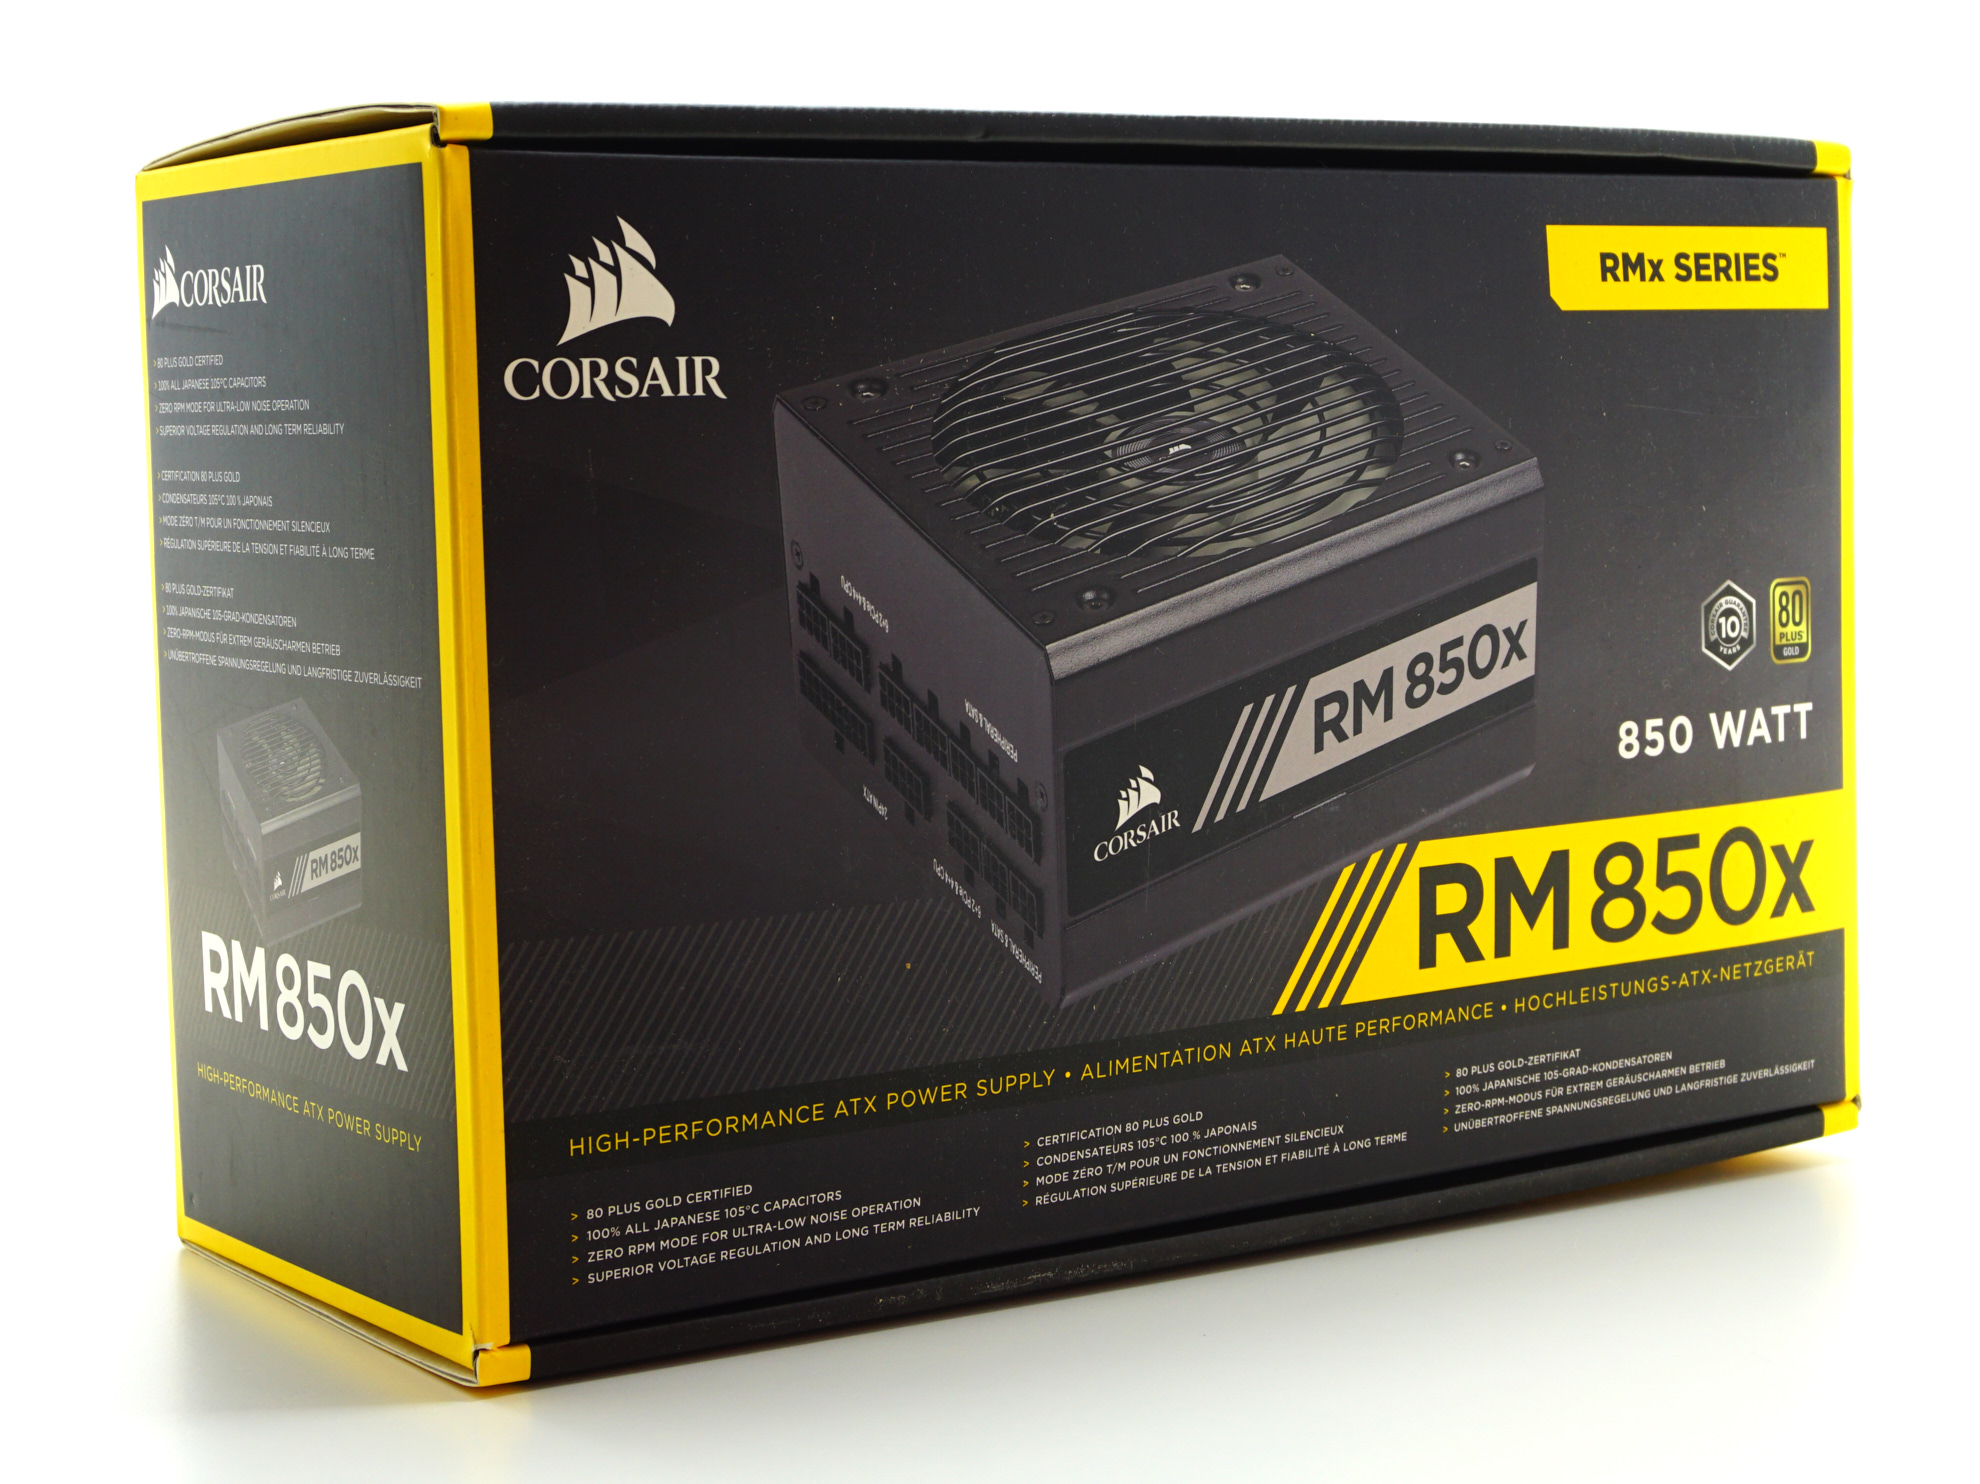 The Corsair RM850x (2018) PSU Exceptional Electrical Performance